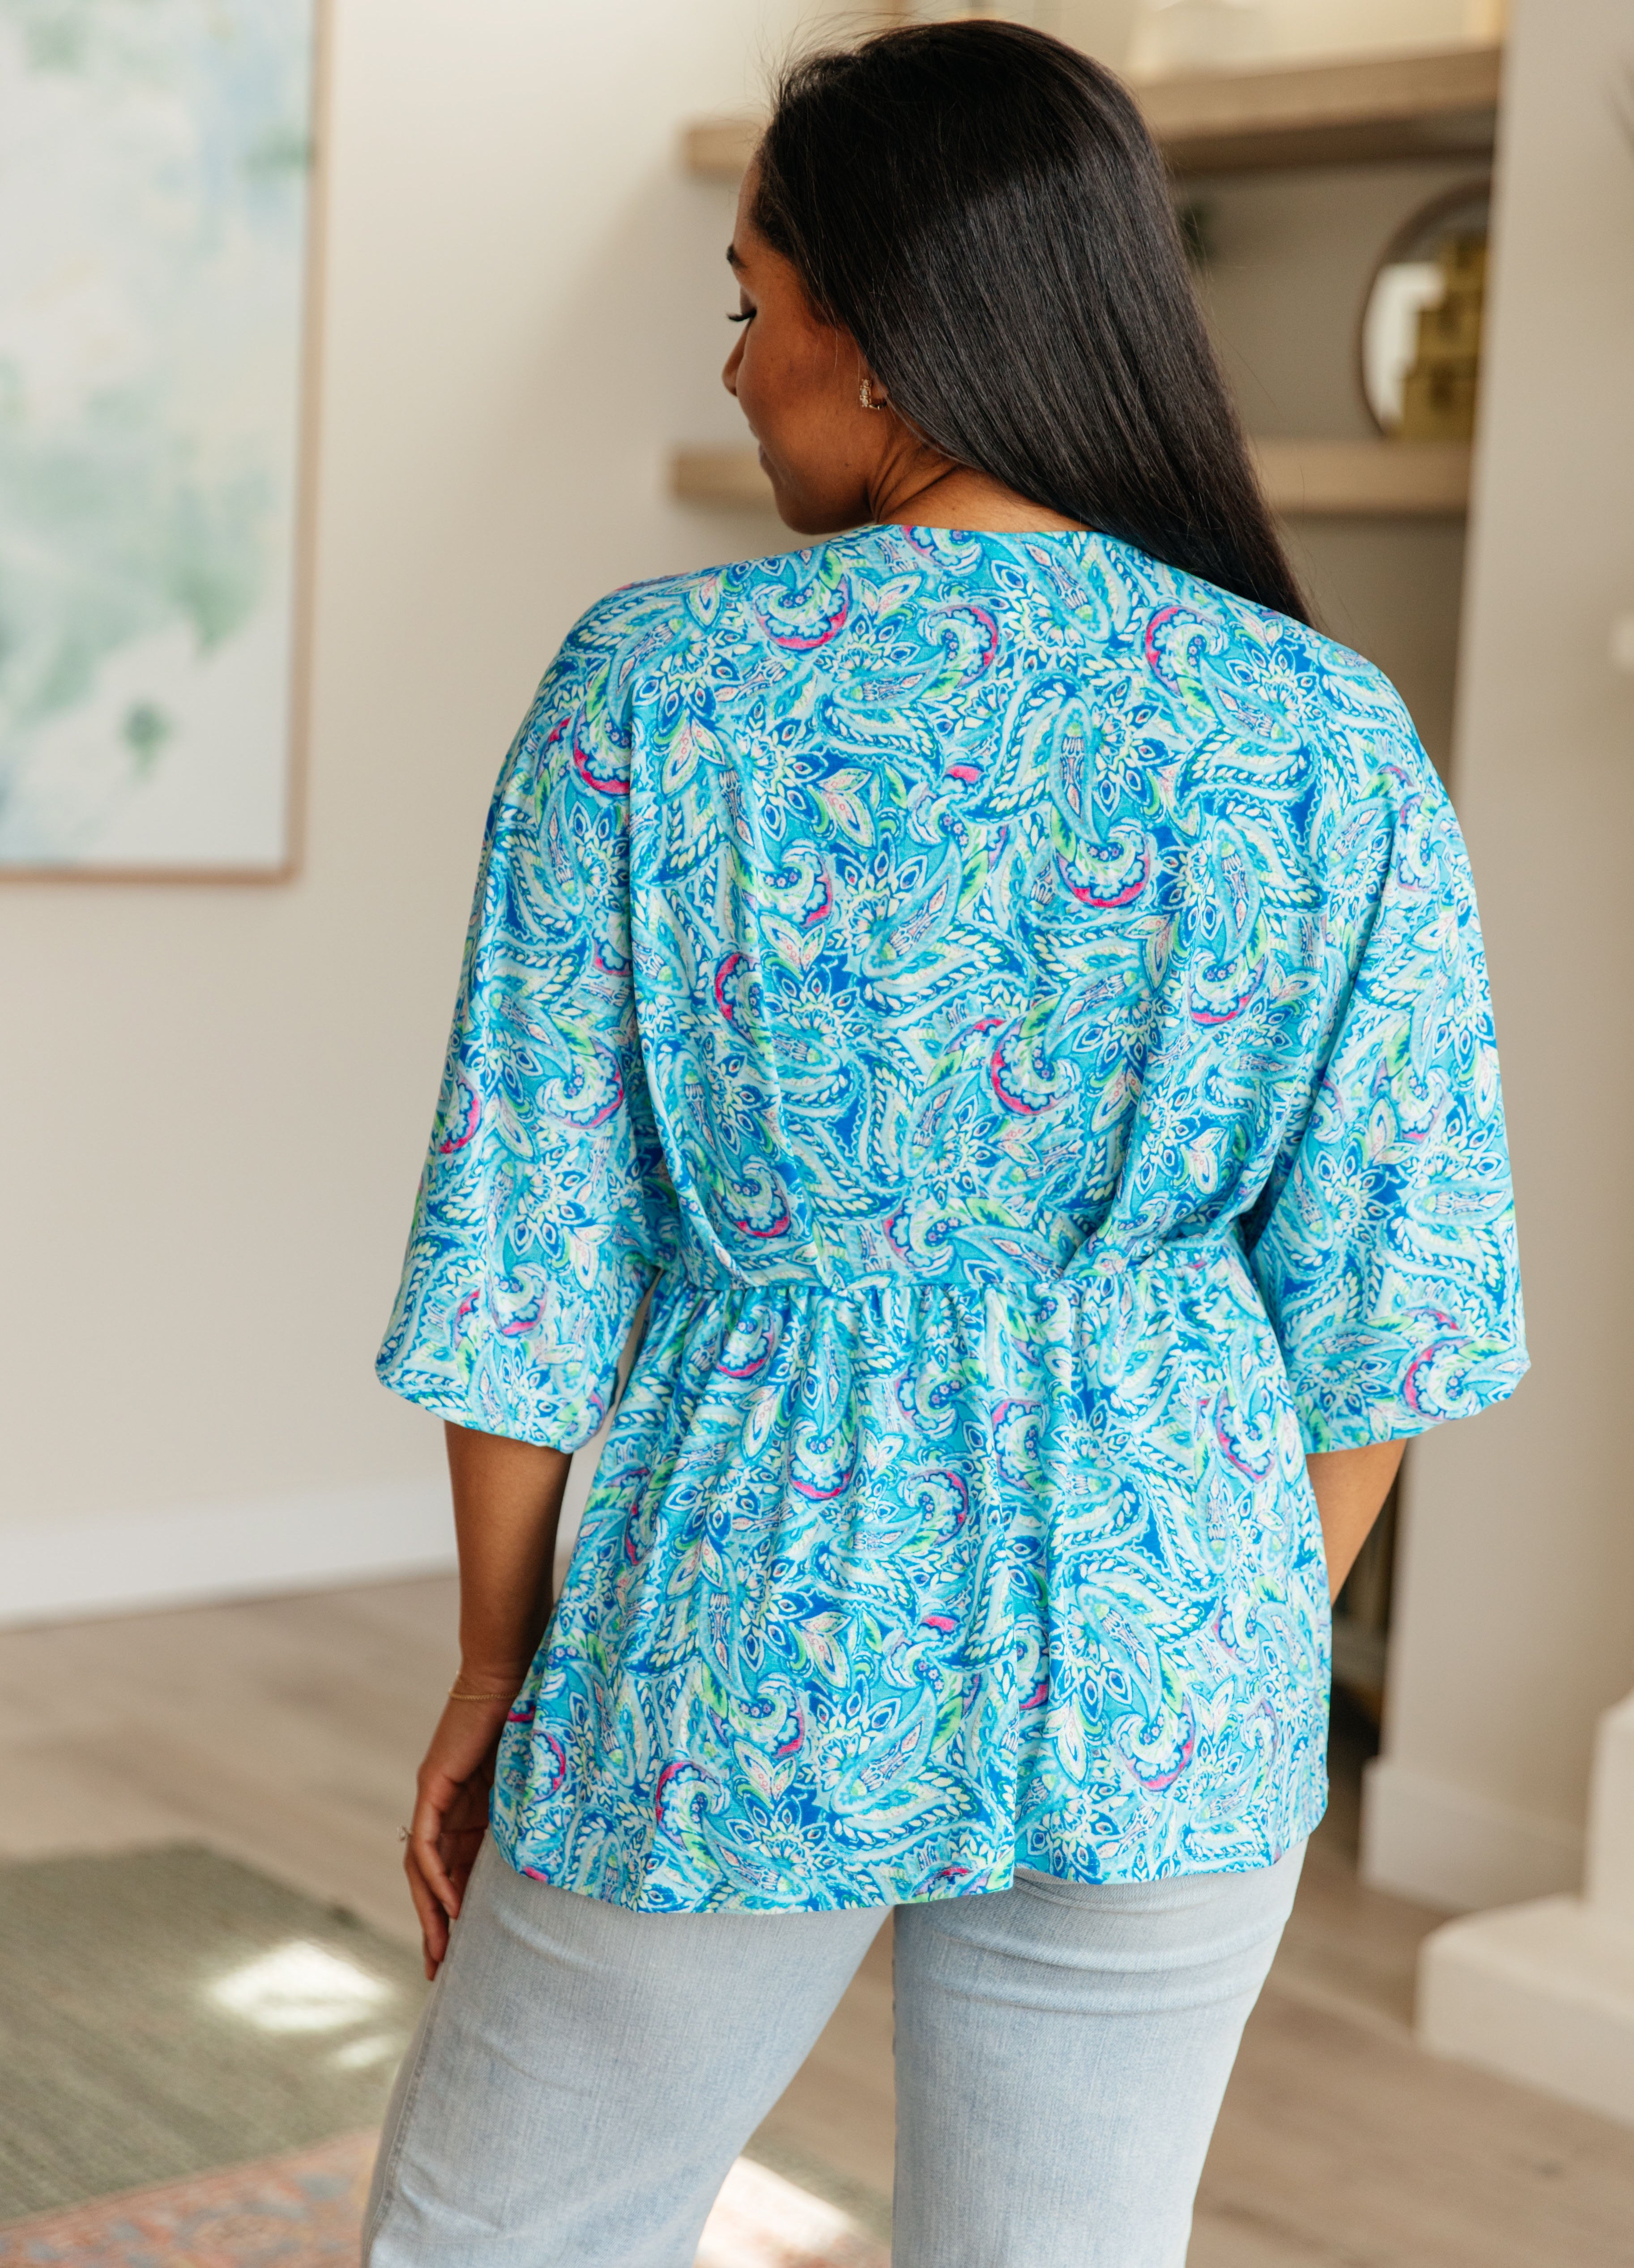 Dreamer Peplum Top in Blue and Teal Paisley-Long Sleeve Tops-Krush Kandy, Women's Online Fashion Boutique Located in Phoenix, Arizona (Scottsdale Area)